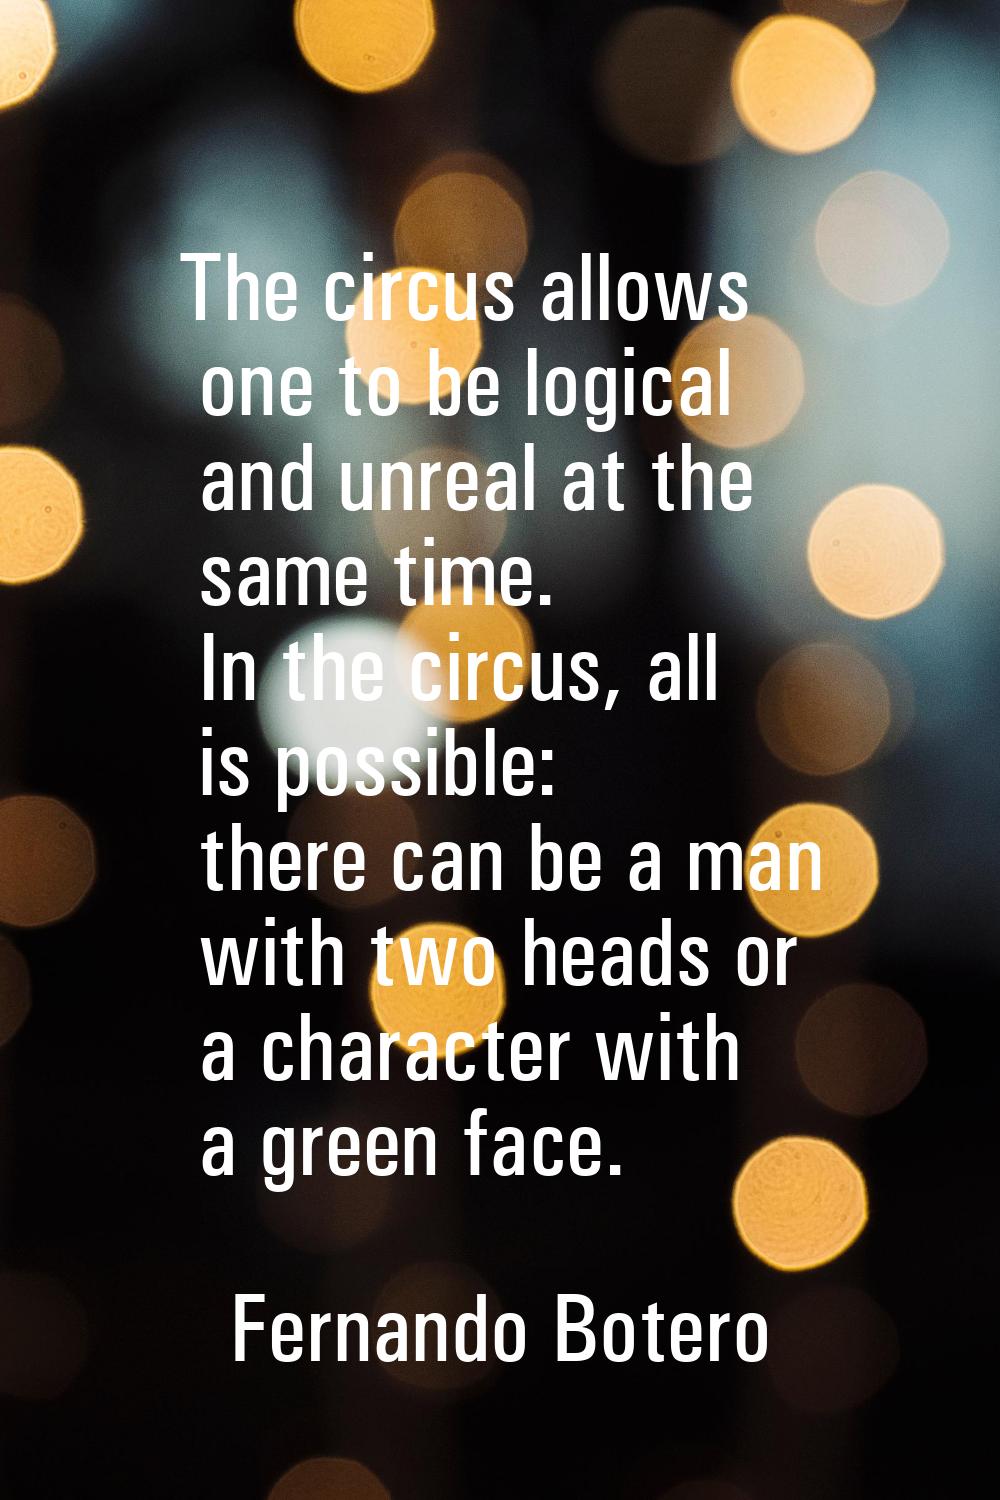 The circus allows one to be logical and unreal at the same time. In the circus, all is possible: th